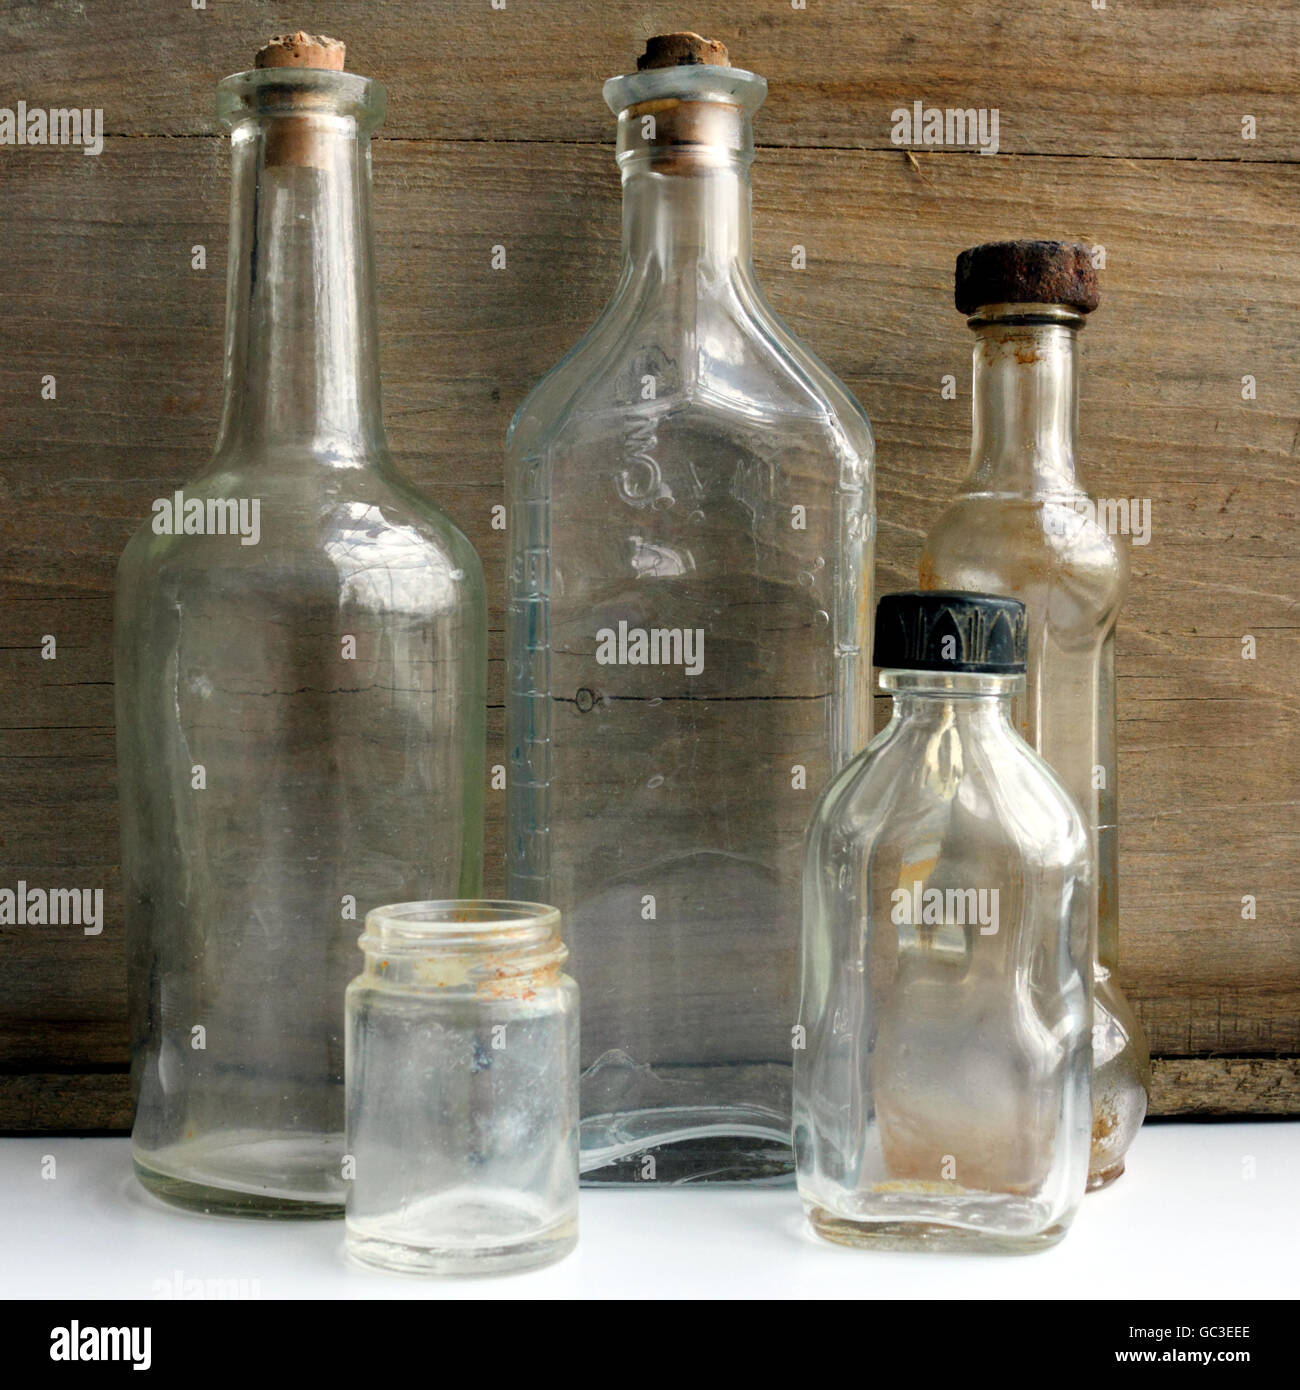 Antique clear glass bottles. Stock Photo